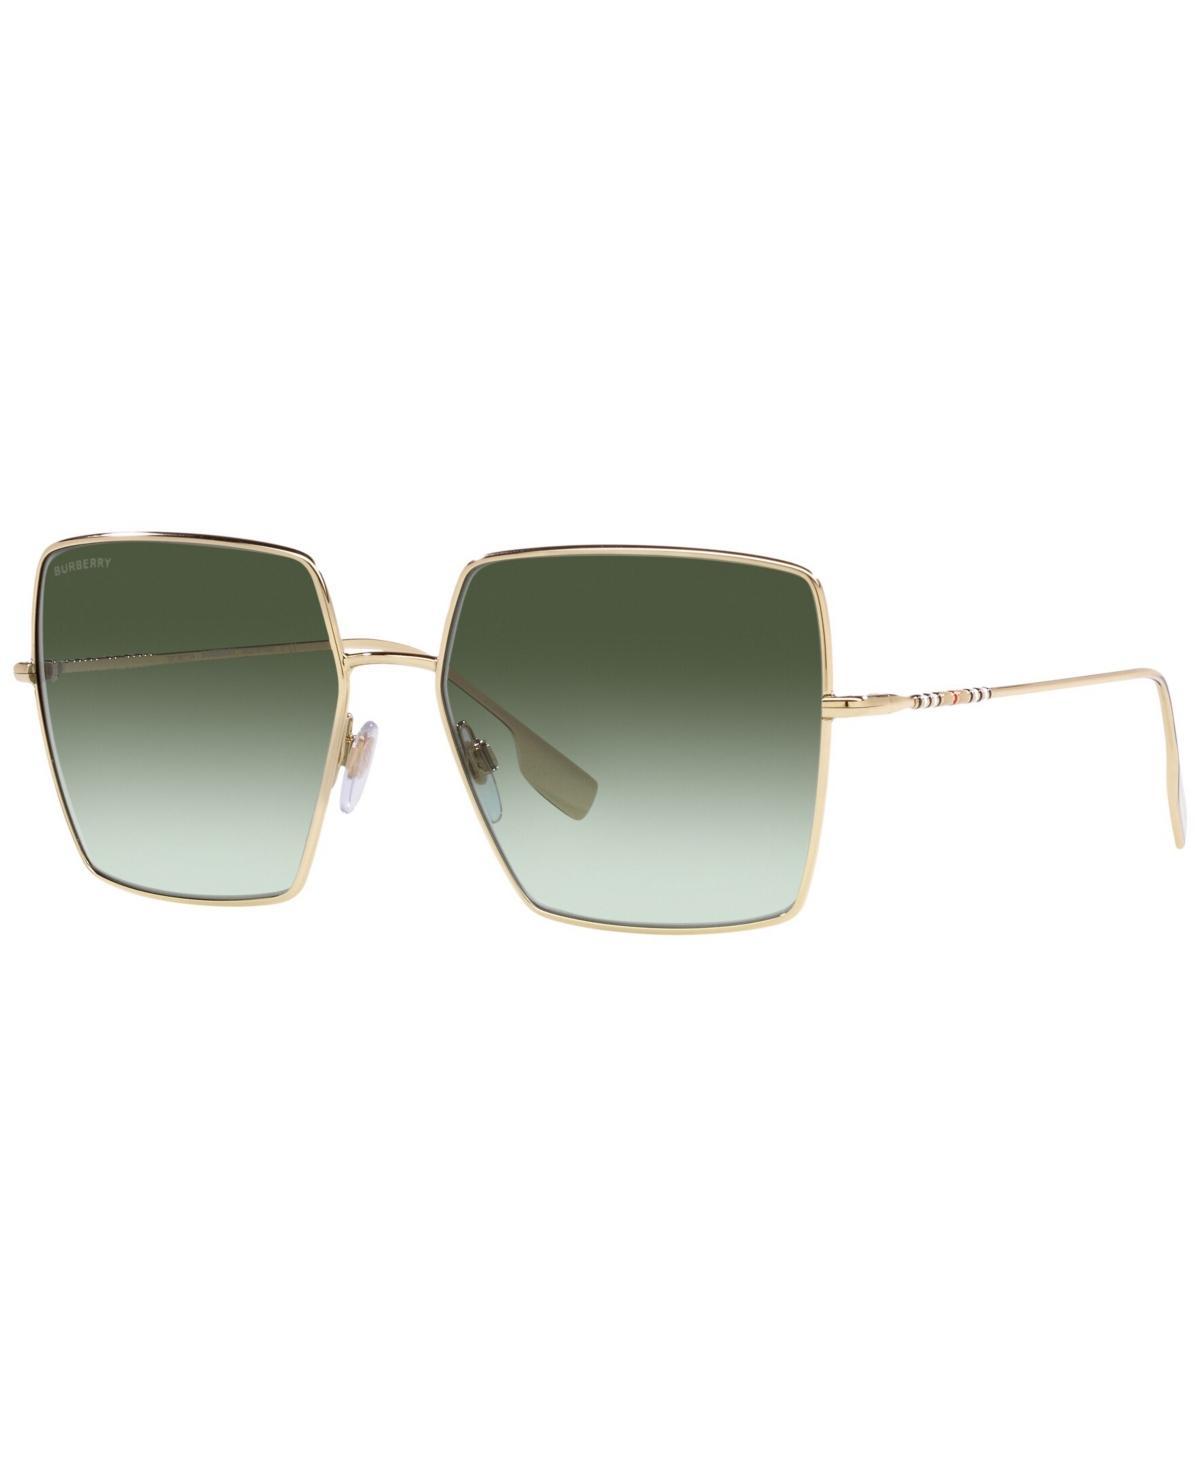 burberry 58mm Square Sunglasses Product Image